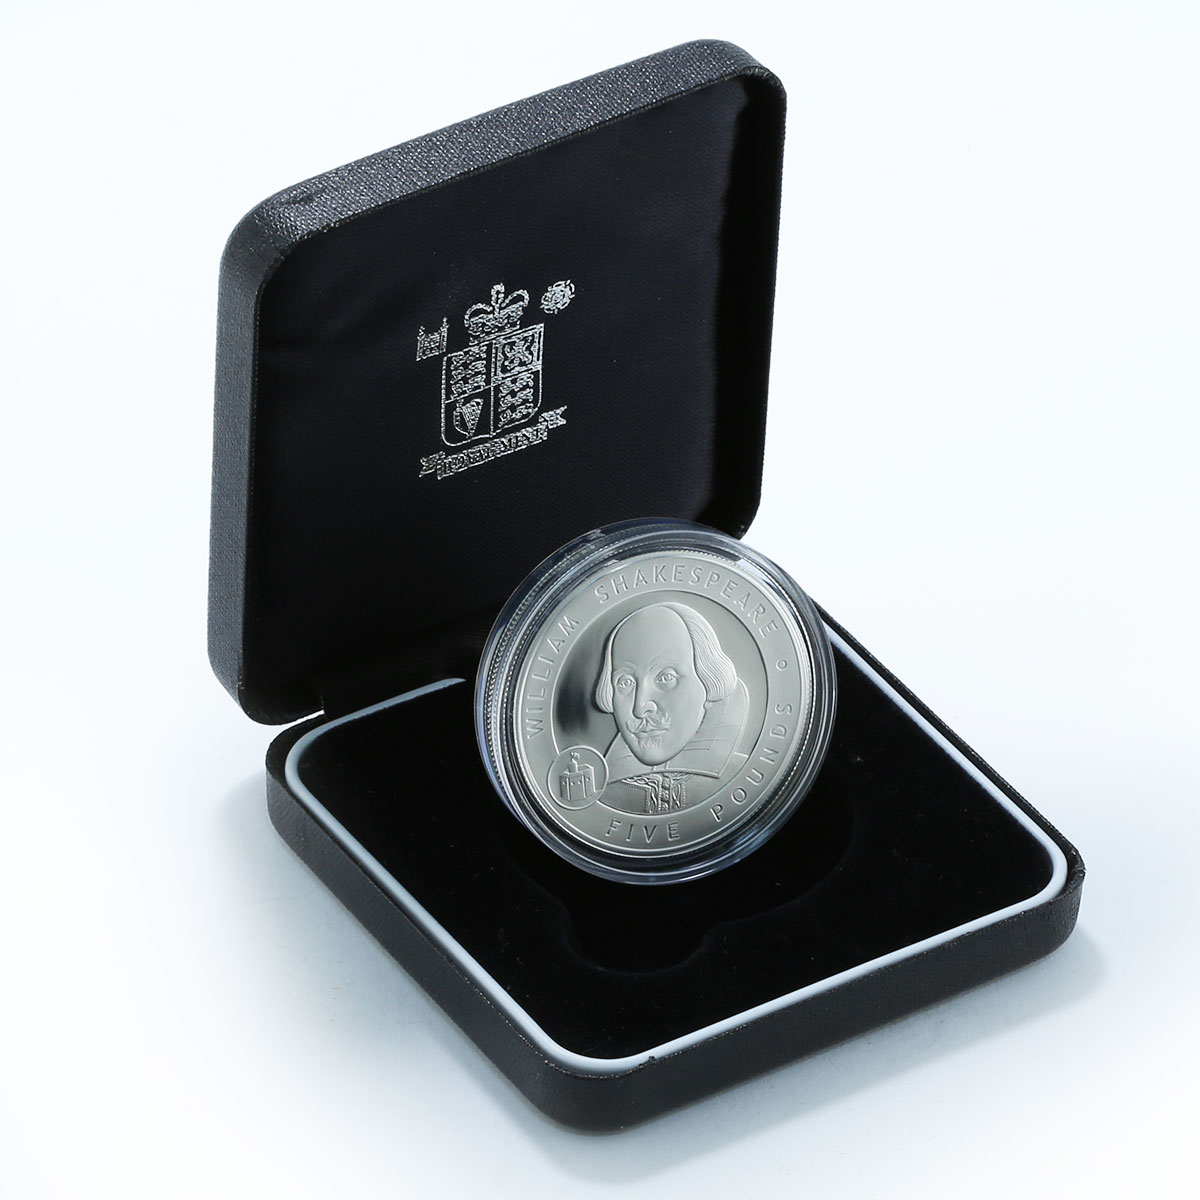 Alderney, 5 Pounds, William Shakespeare, silver proof coin 2006